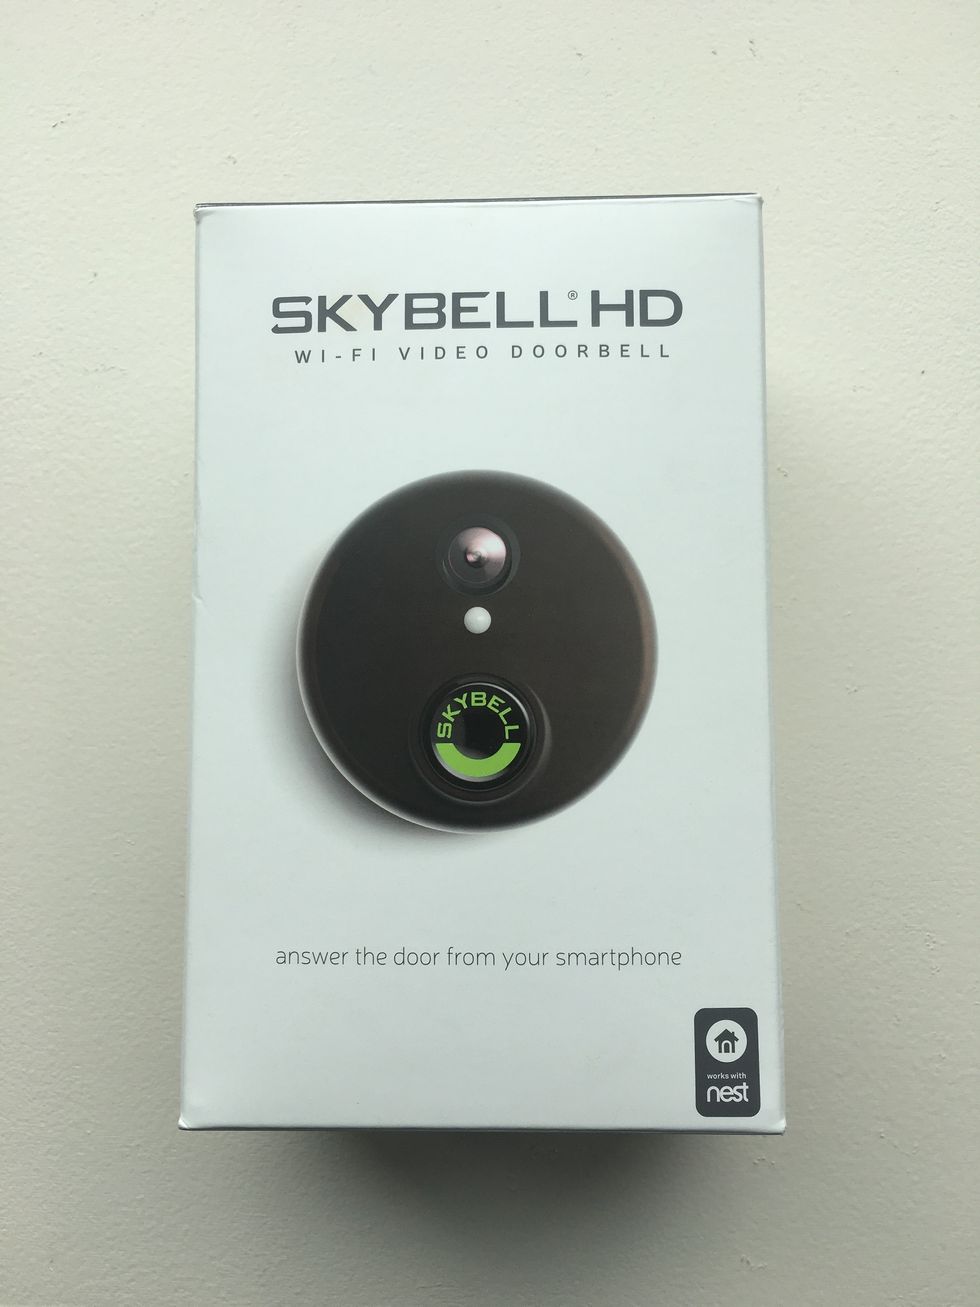 photo of Skybell HD box